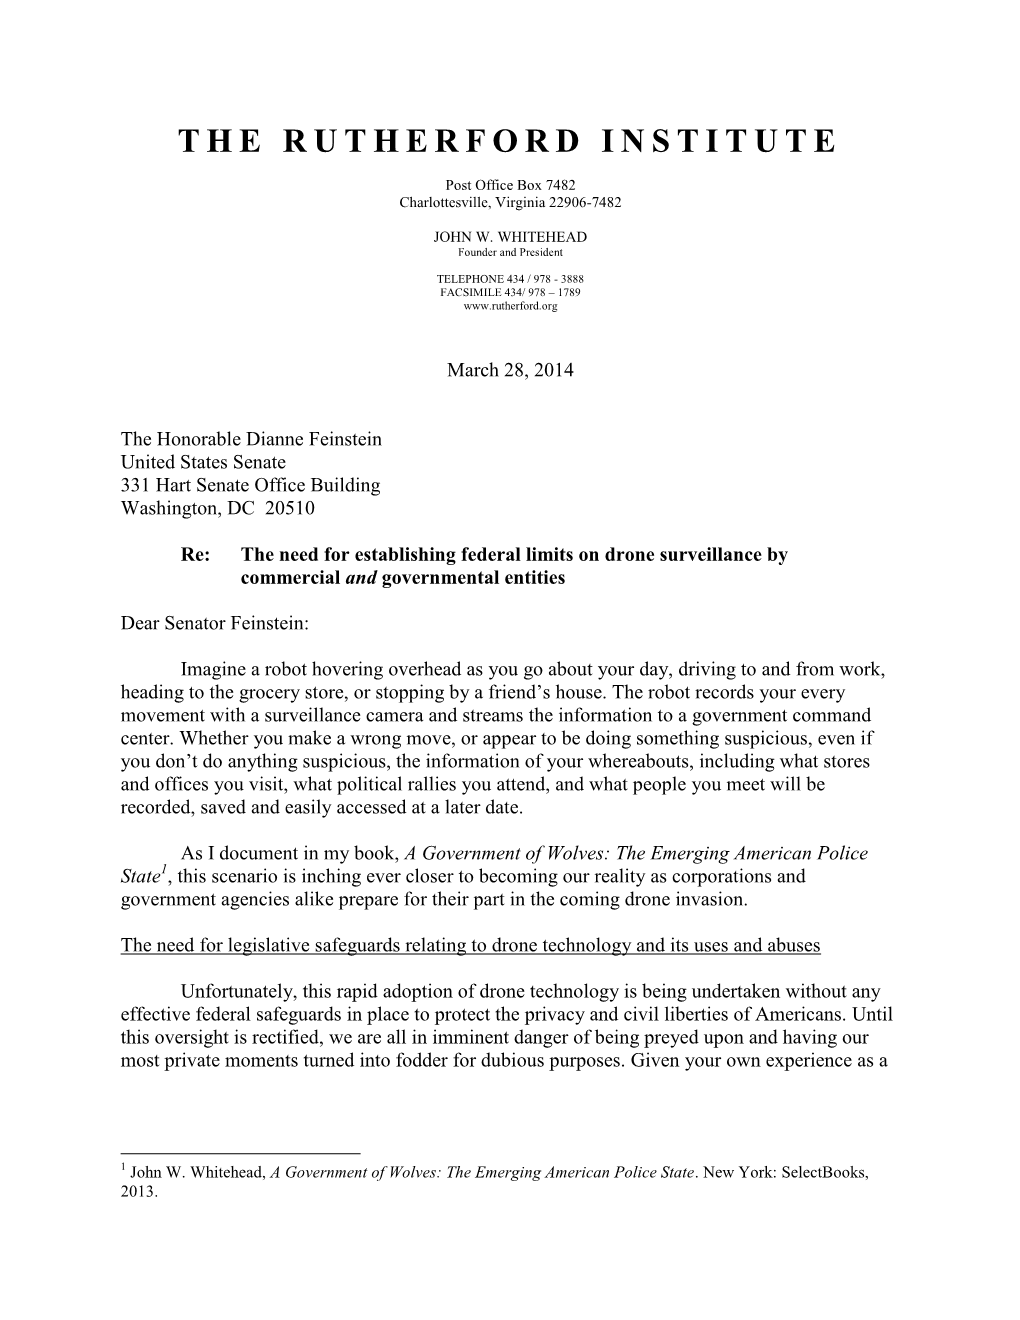 To Read the Rutherford Institute's Letter to Sen. Feinstein